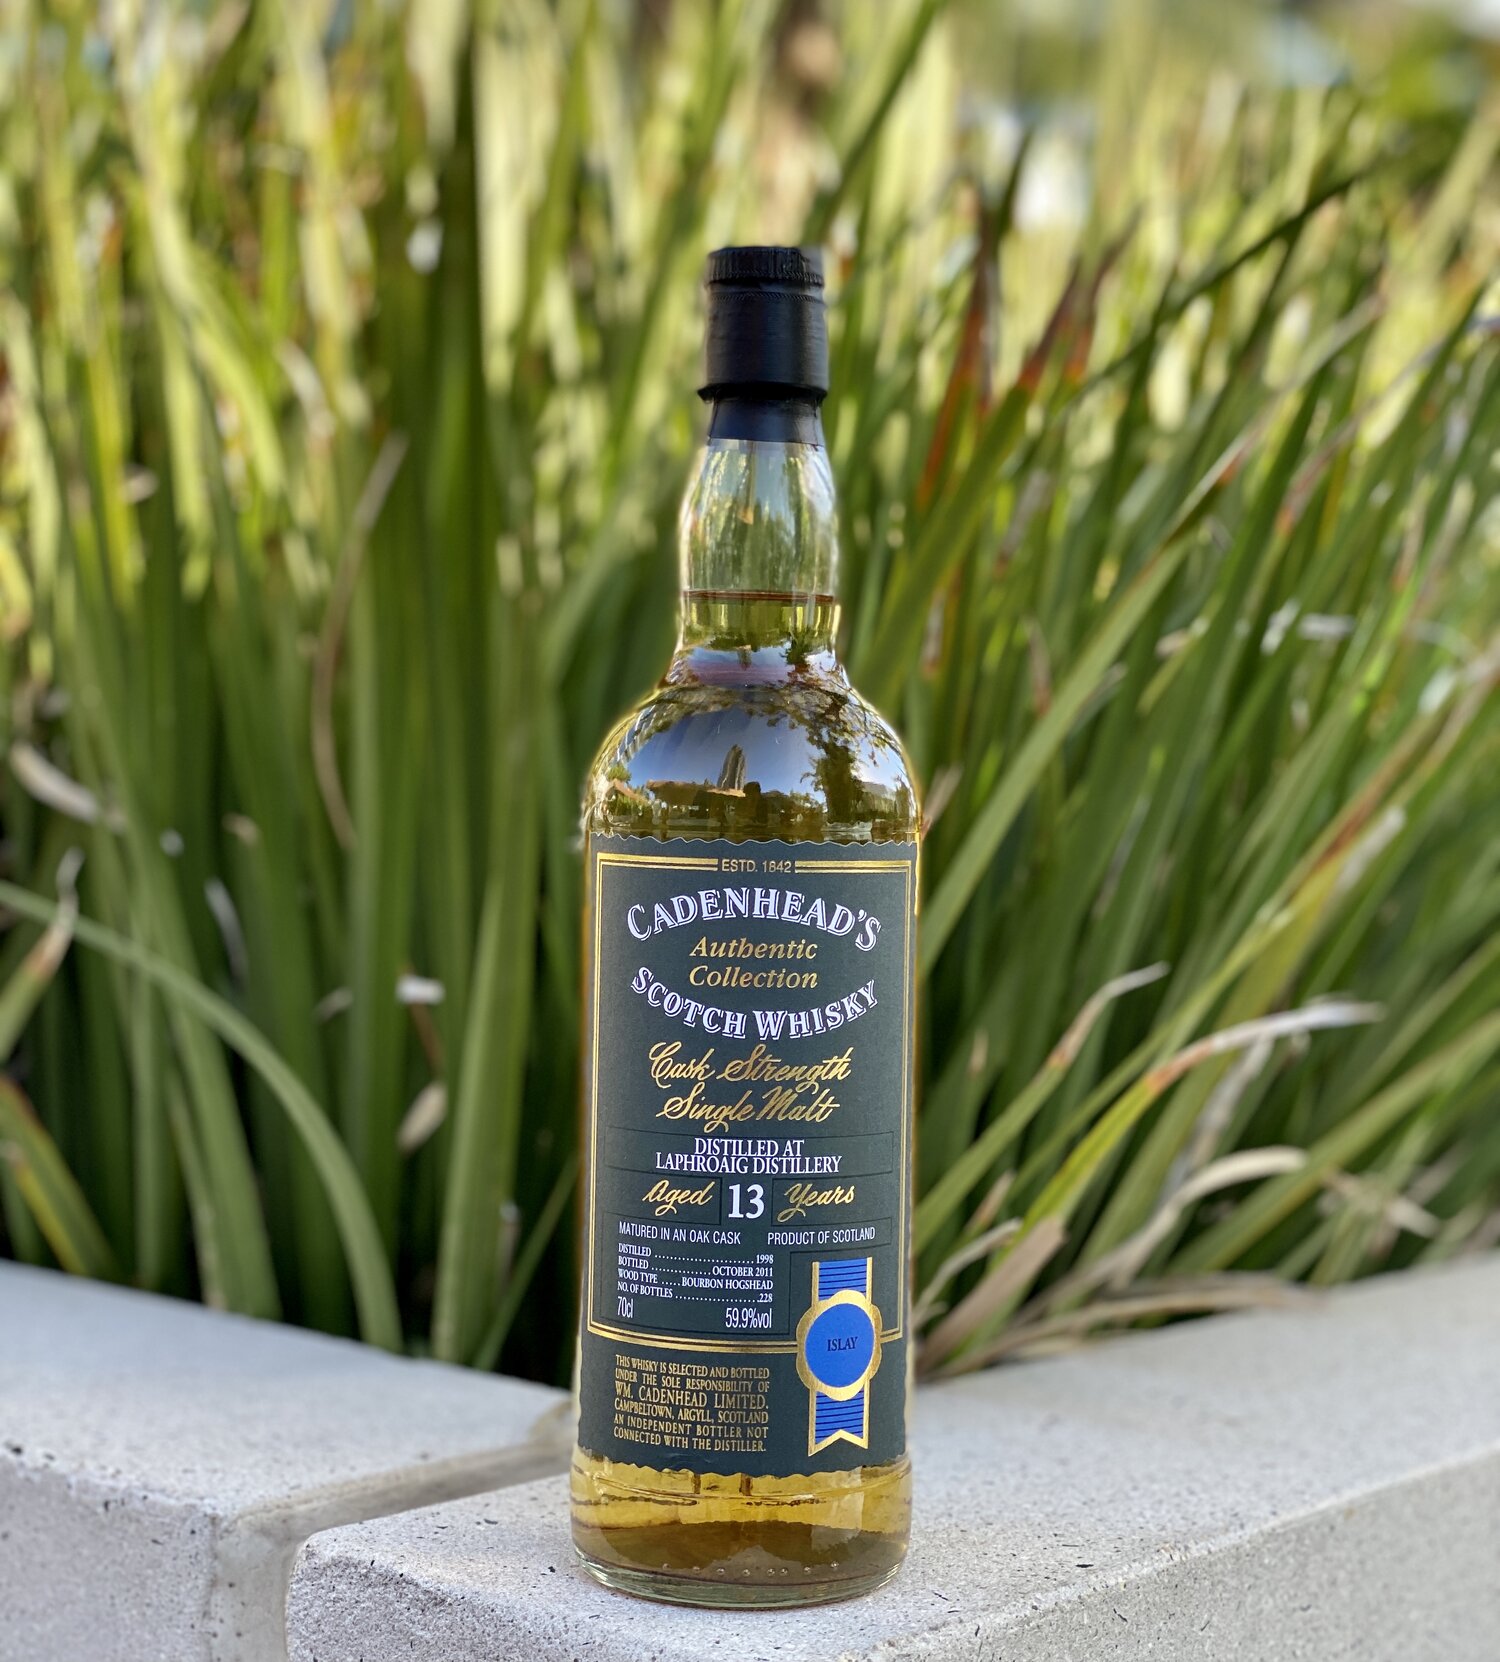 Laphroaig 13 Year, Cadenhead's Authentic Collection — Whiskery Turnip | Whisky Hawaii